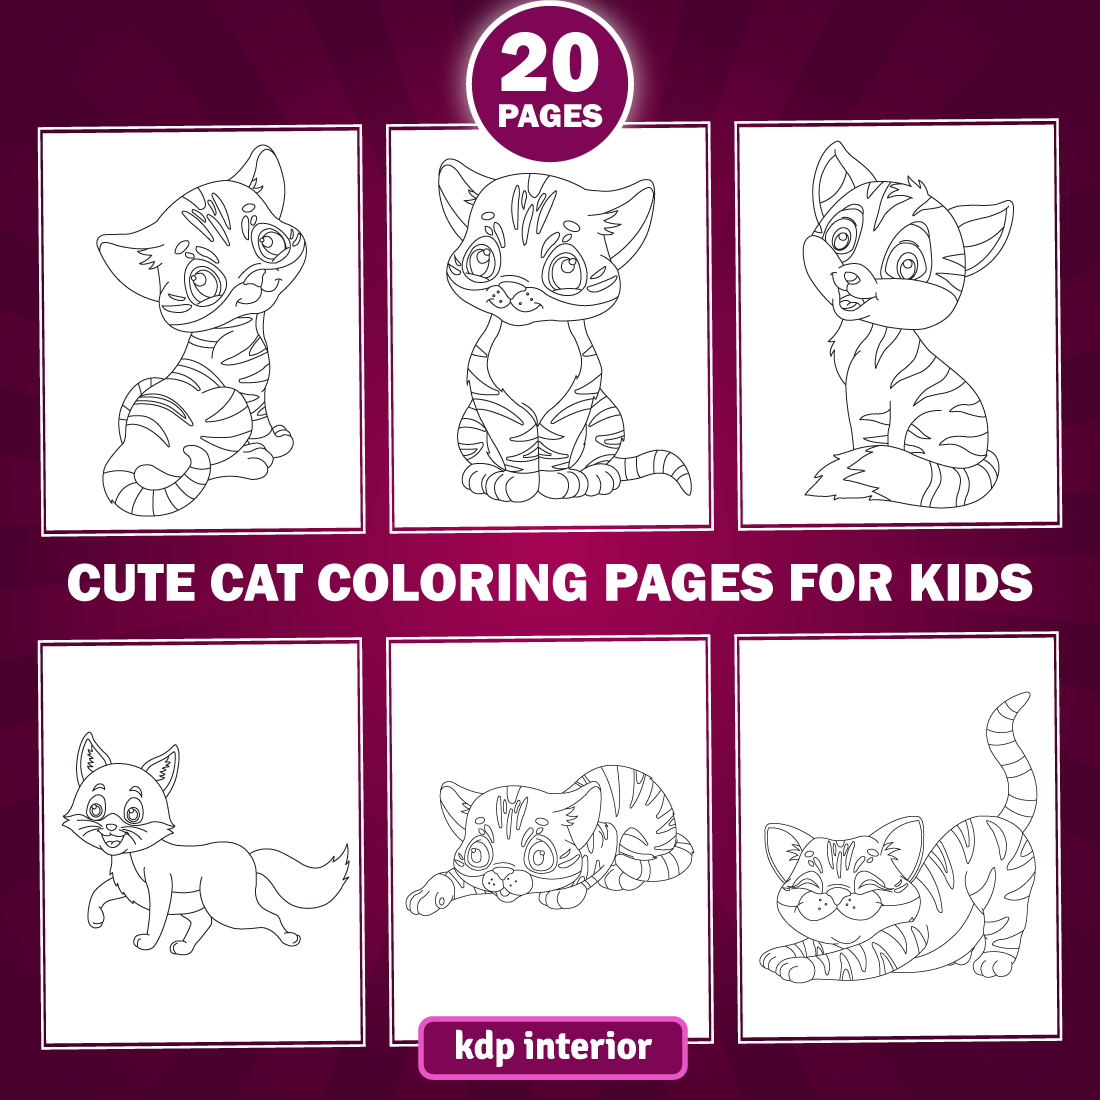 20 Cute Cat Coloring Pages for KDP Interior for Kids and Adult main cover.